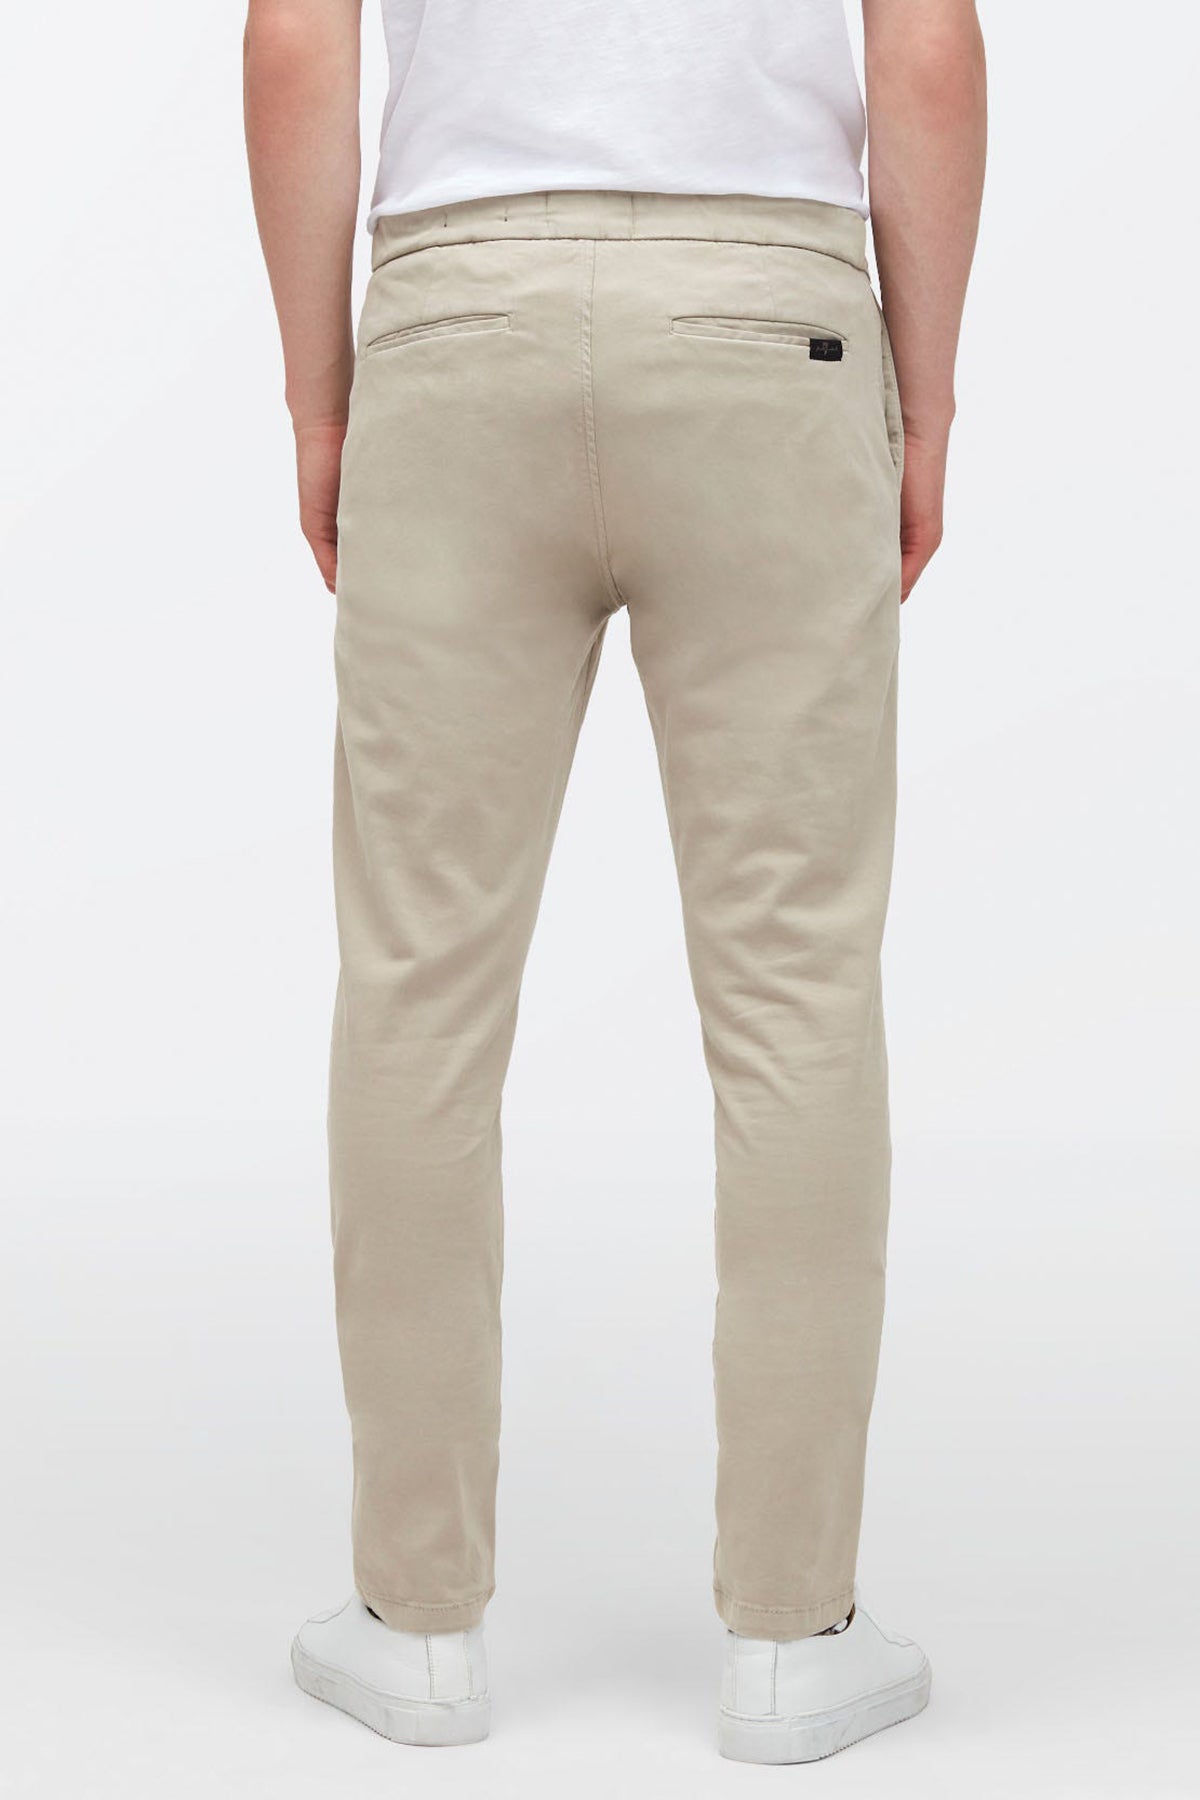 7 For All Mankind Tapered Slim Fit Pantolon-Libas Trendy Fashion Store